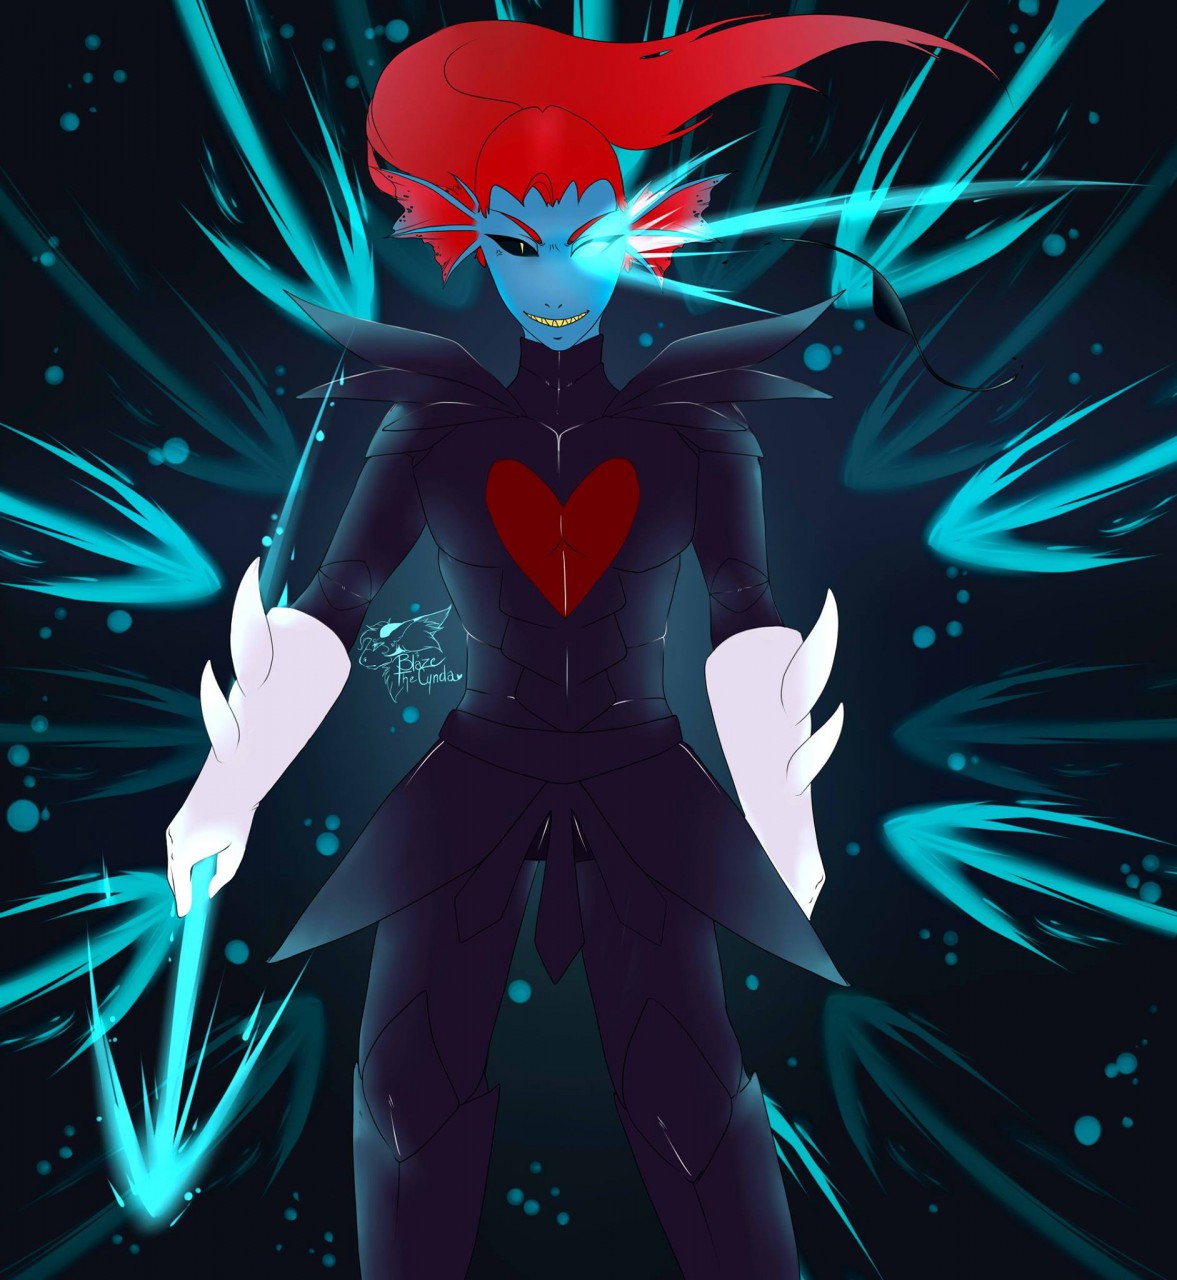 Undyne the Undying by Blaze_TheCyndaquil -- Fur Affinity [dot] net